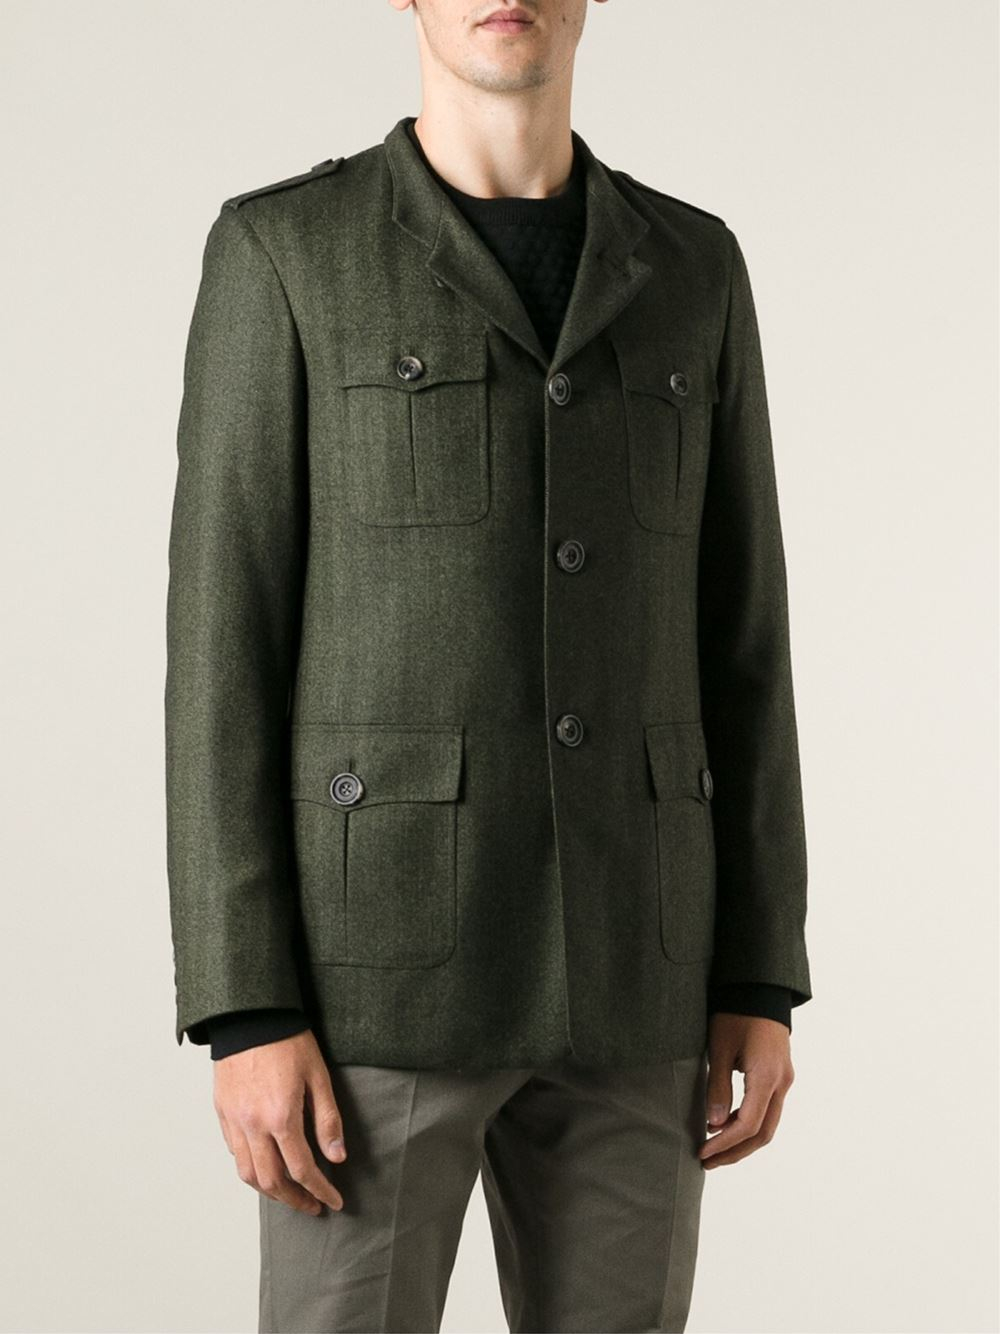 Richard James Four Inverted Pleat Pockets Jacket in Green for Men - Lyst